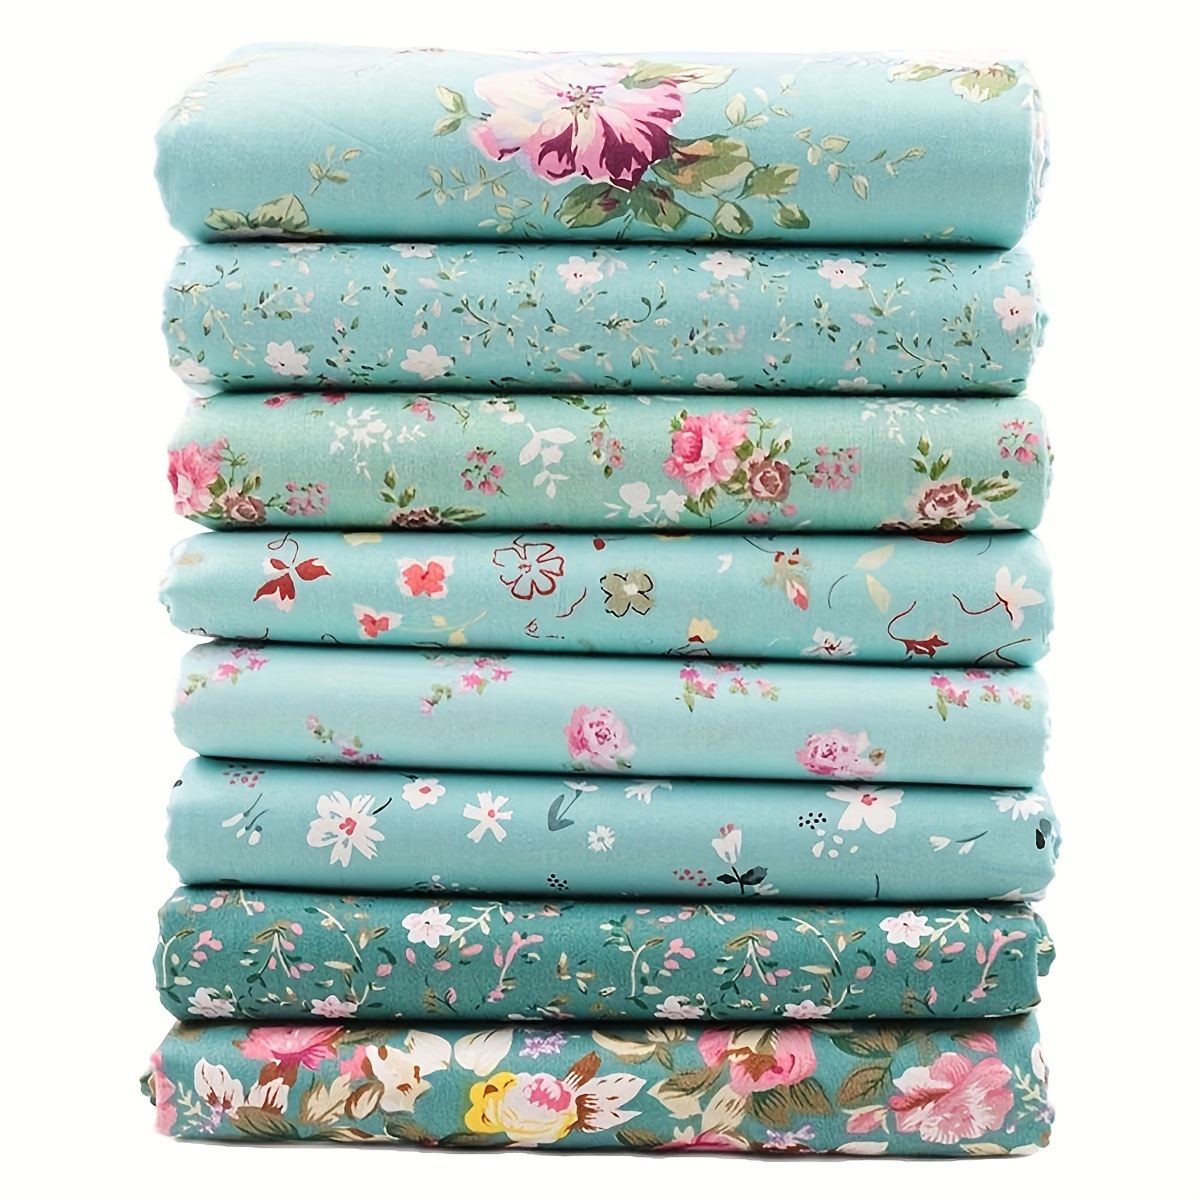 

8pcs Green Cotton Fabric Fat Quarters Bundles, 40cm X 50cm, Hand Wash Only 100% Cotton Patterned Flower Precuts For Quilting And Sewing Crafting